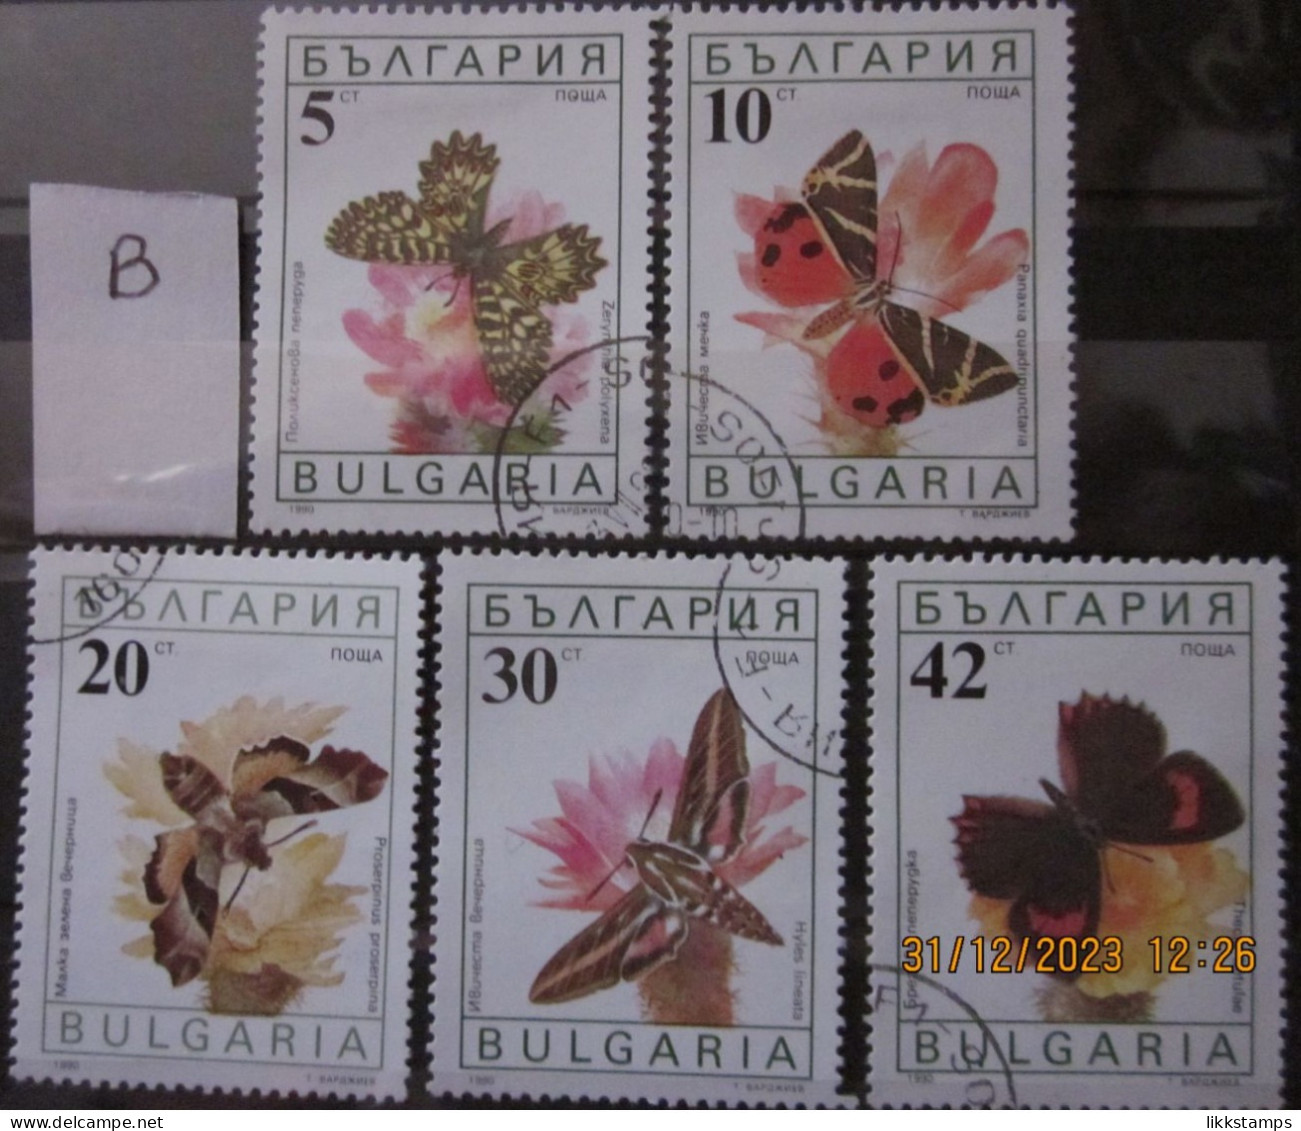 BULGARIA 1990 ~ S.G. 3699 - 3703, ~ 'LOT B' ~ BUTTERFLIES AND MOTHS. ~  VFU #02917 - Used Stamps